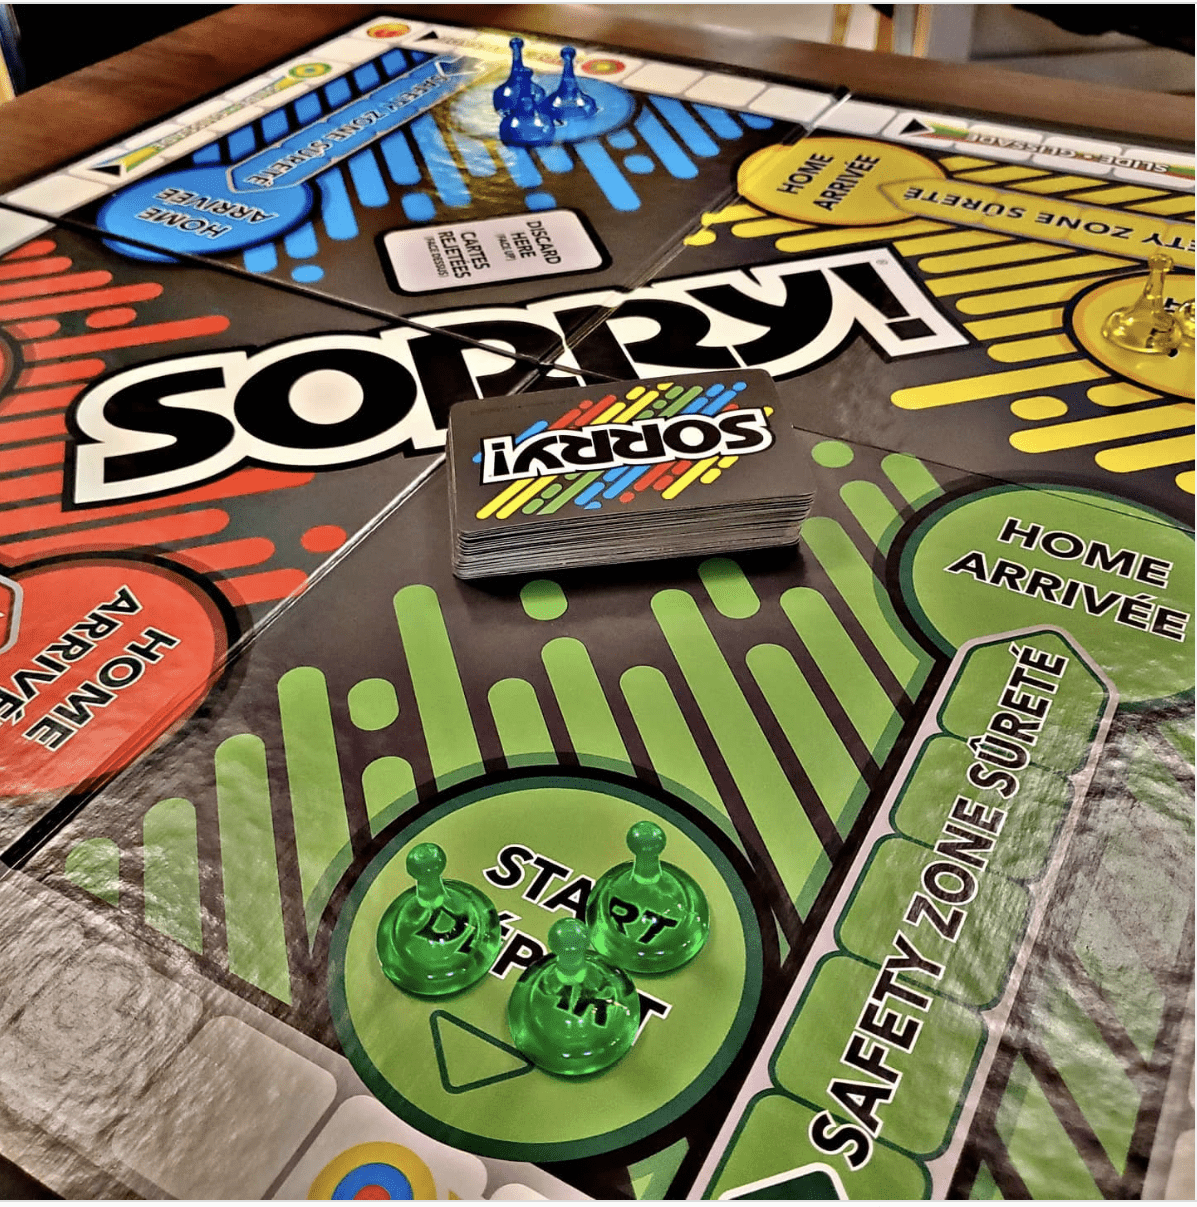 Closeup photo of the board game “Sorry!”